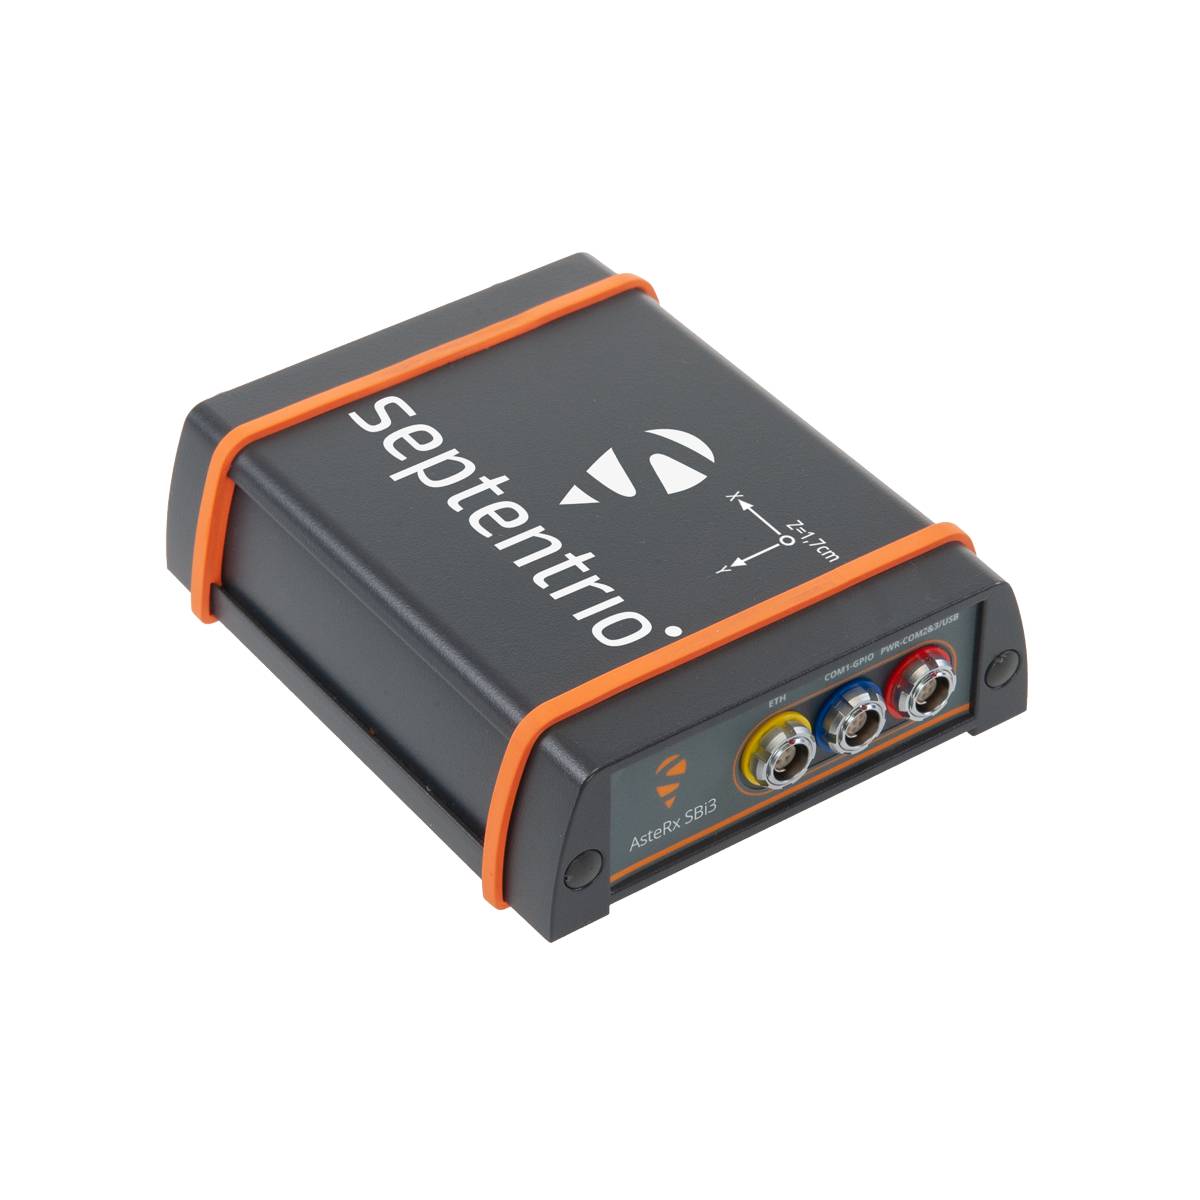 Septentrio and XenomatiX partner for accurate LiDAR 3D mapping solutions